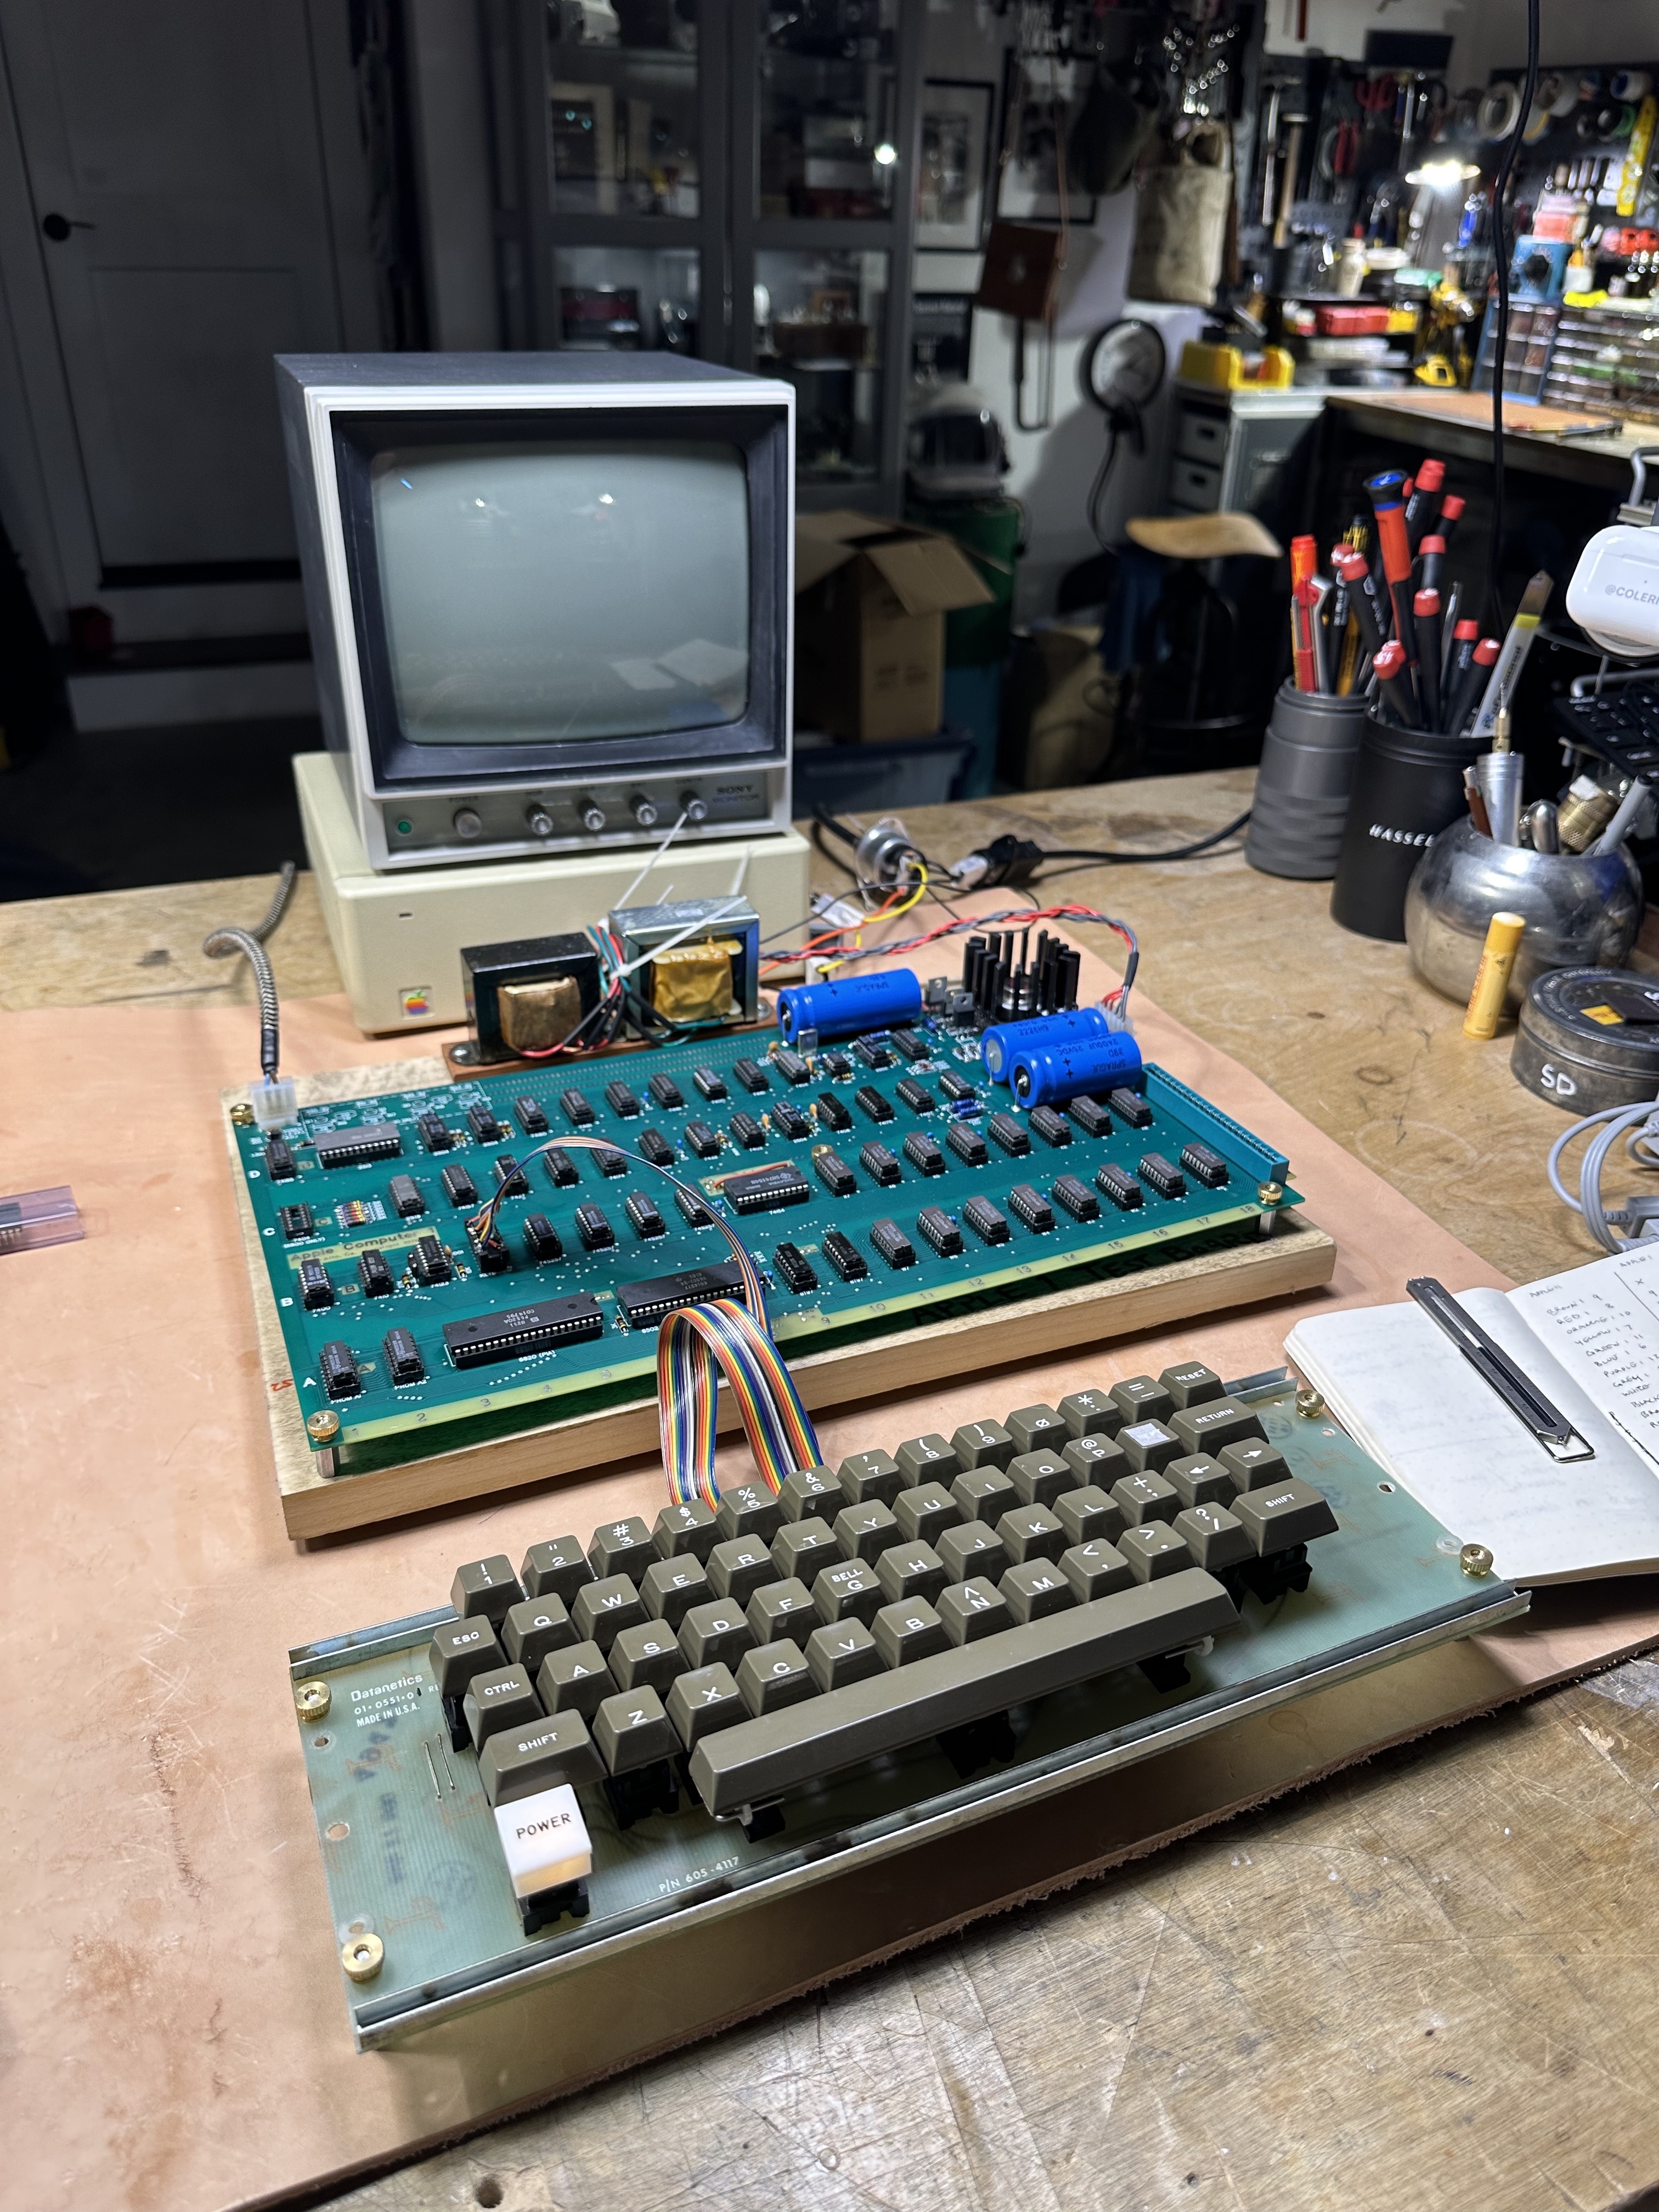 Apple 1 Replica. Yes that's an HD20 being used as a monitor stand.